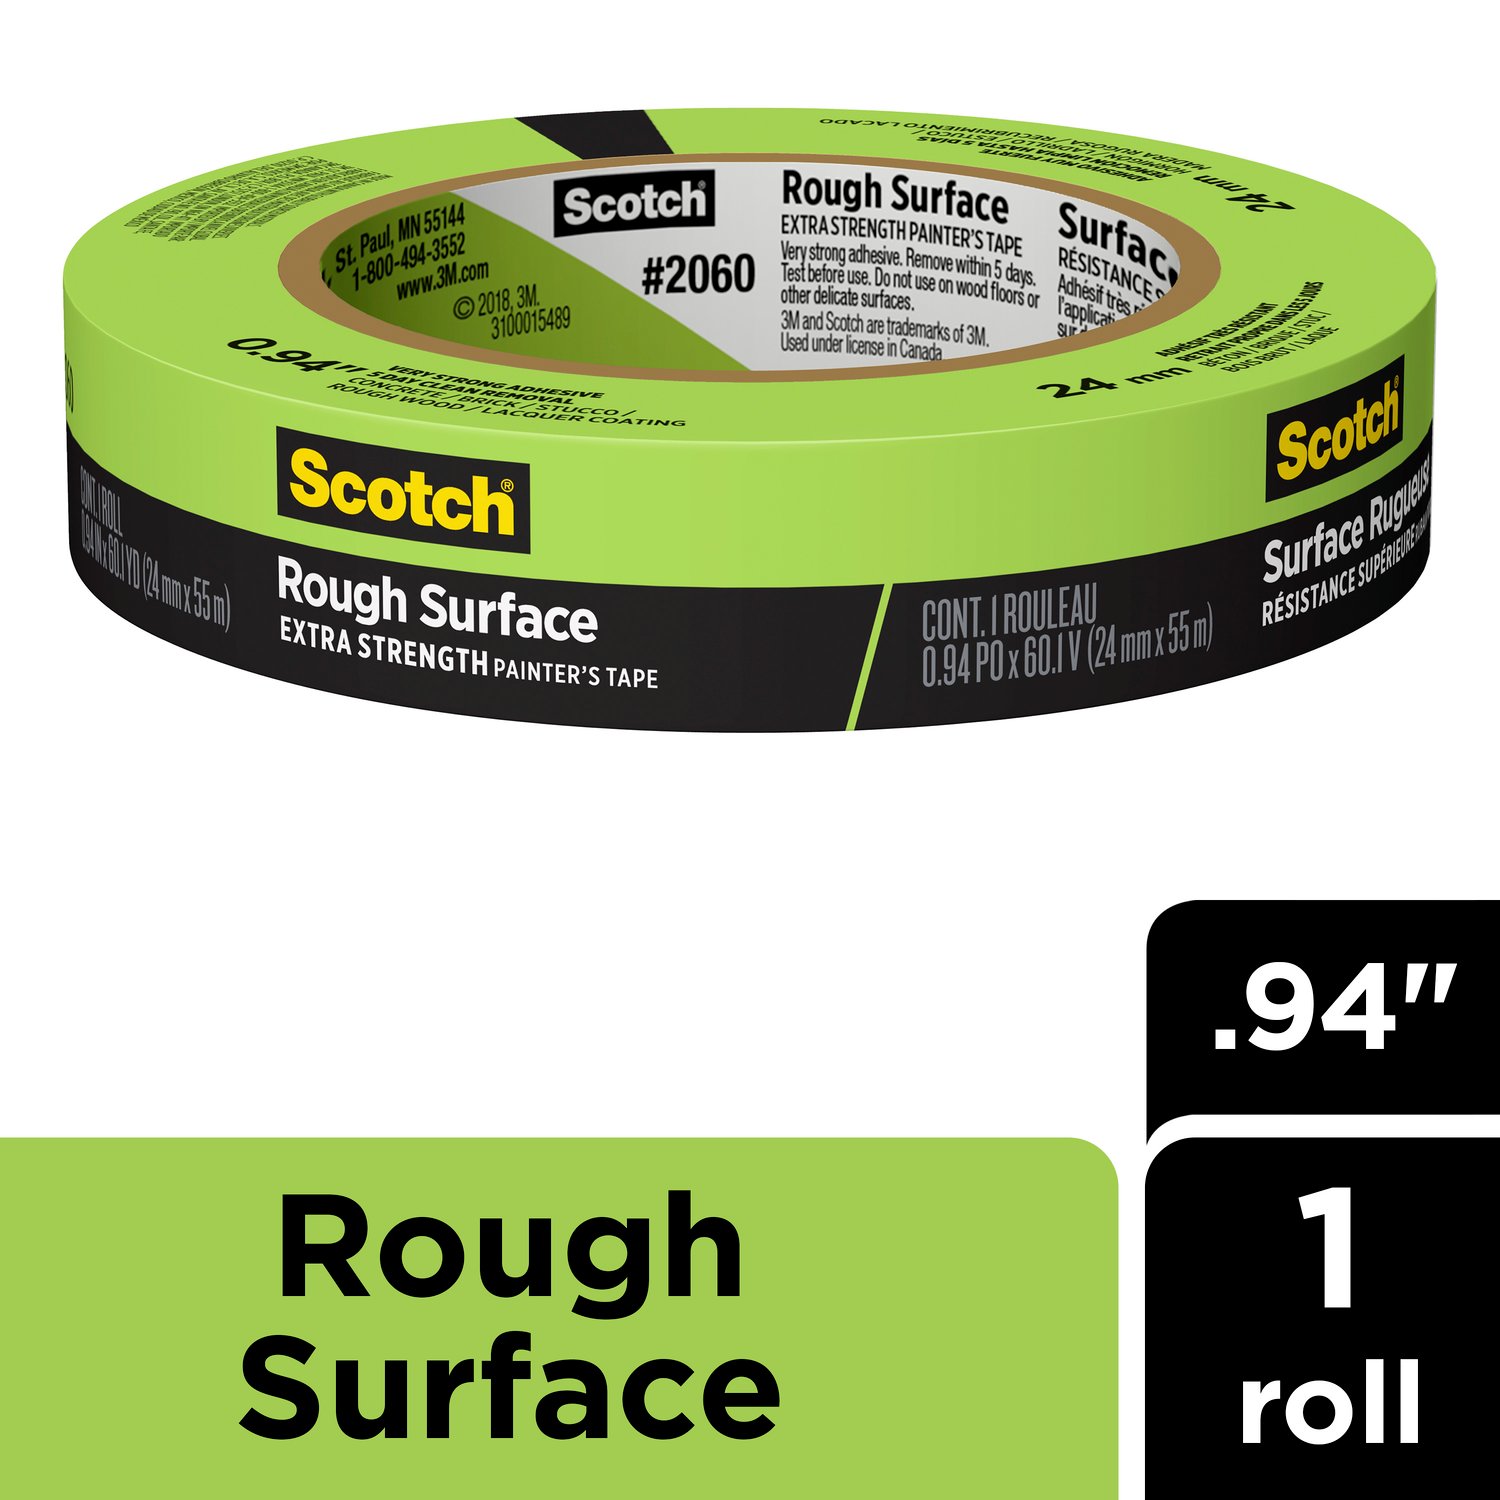 7100185563 - Scotch Rough Surface Painter's Tape 2060-24AP, 0.94 in x 60.1 yd (24mm
x 55m)